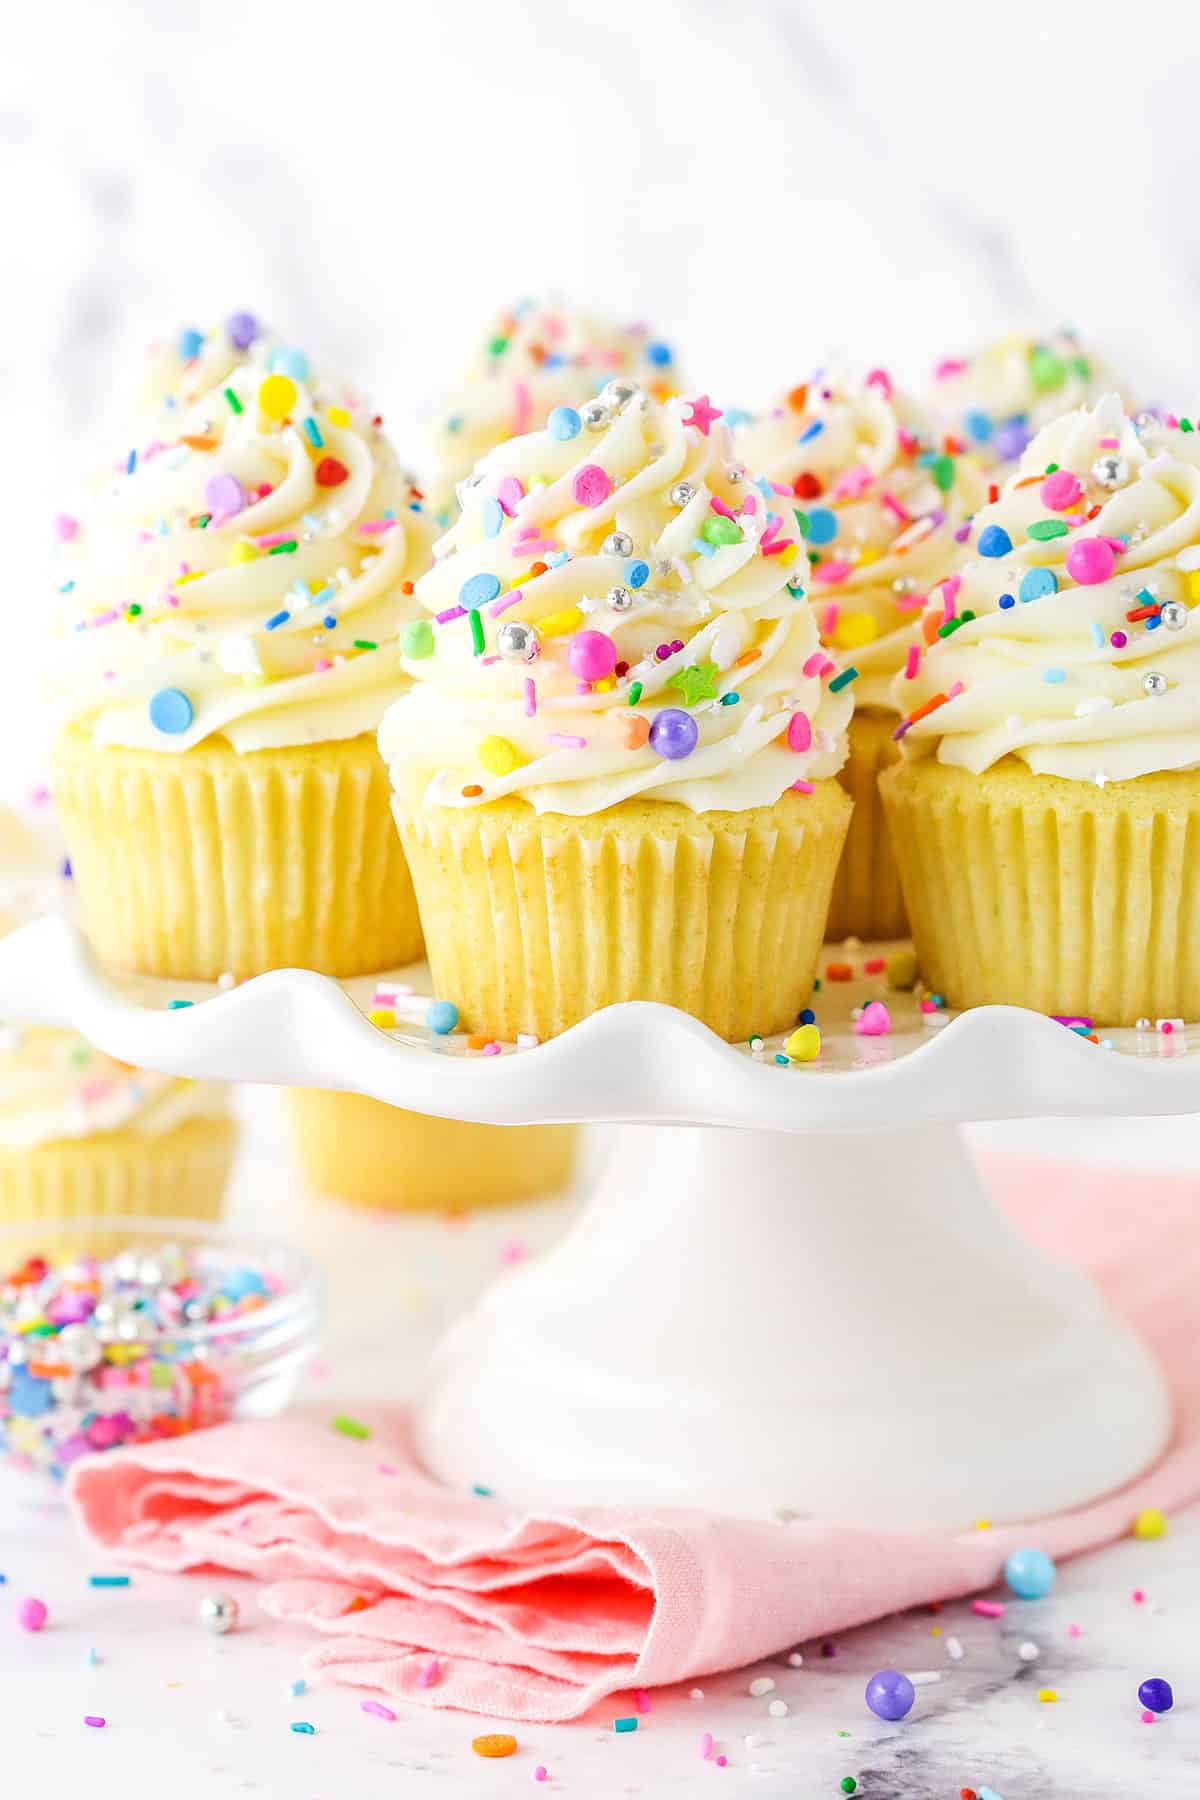 Frosted vanilla cupcakes on a cupcake stand with rainbow sprinkles